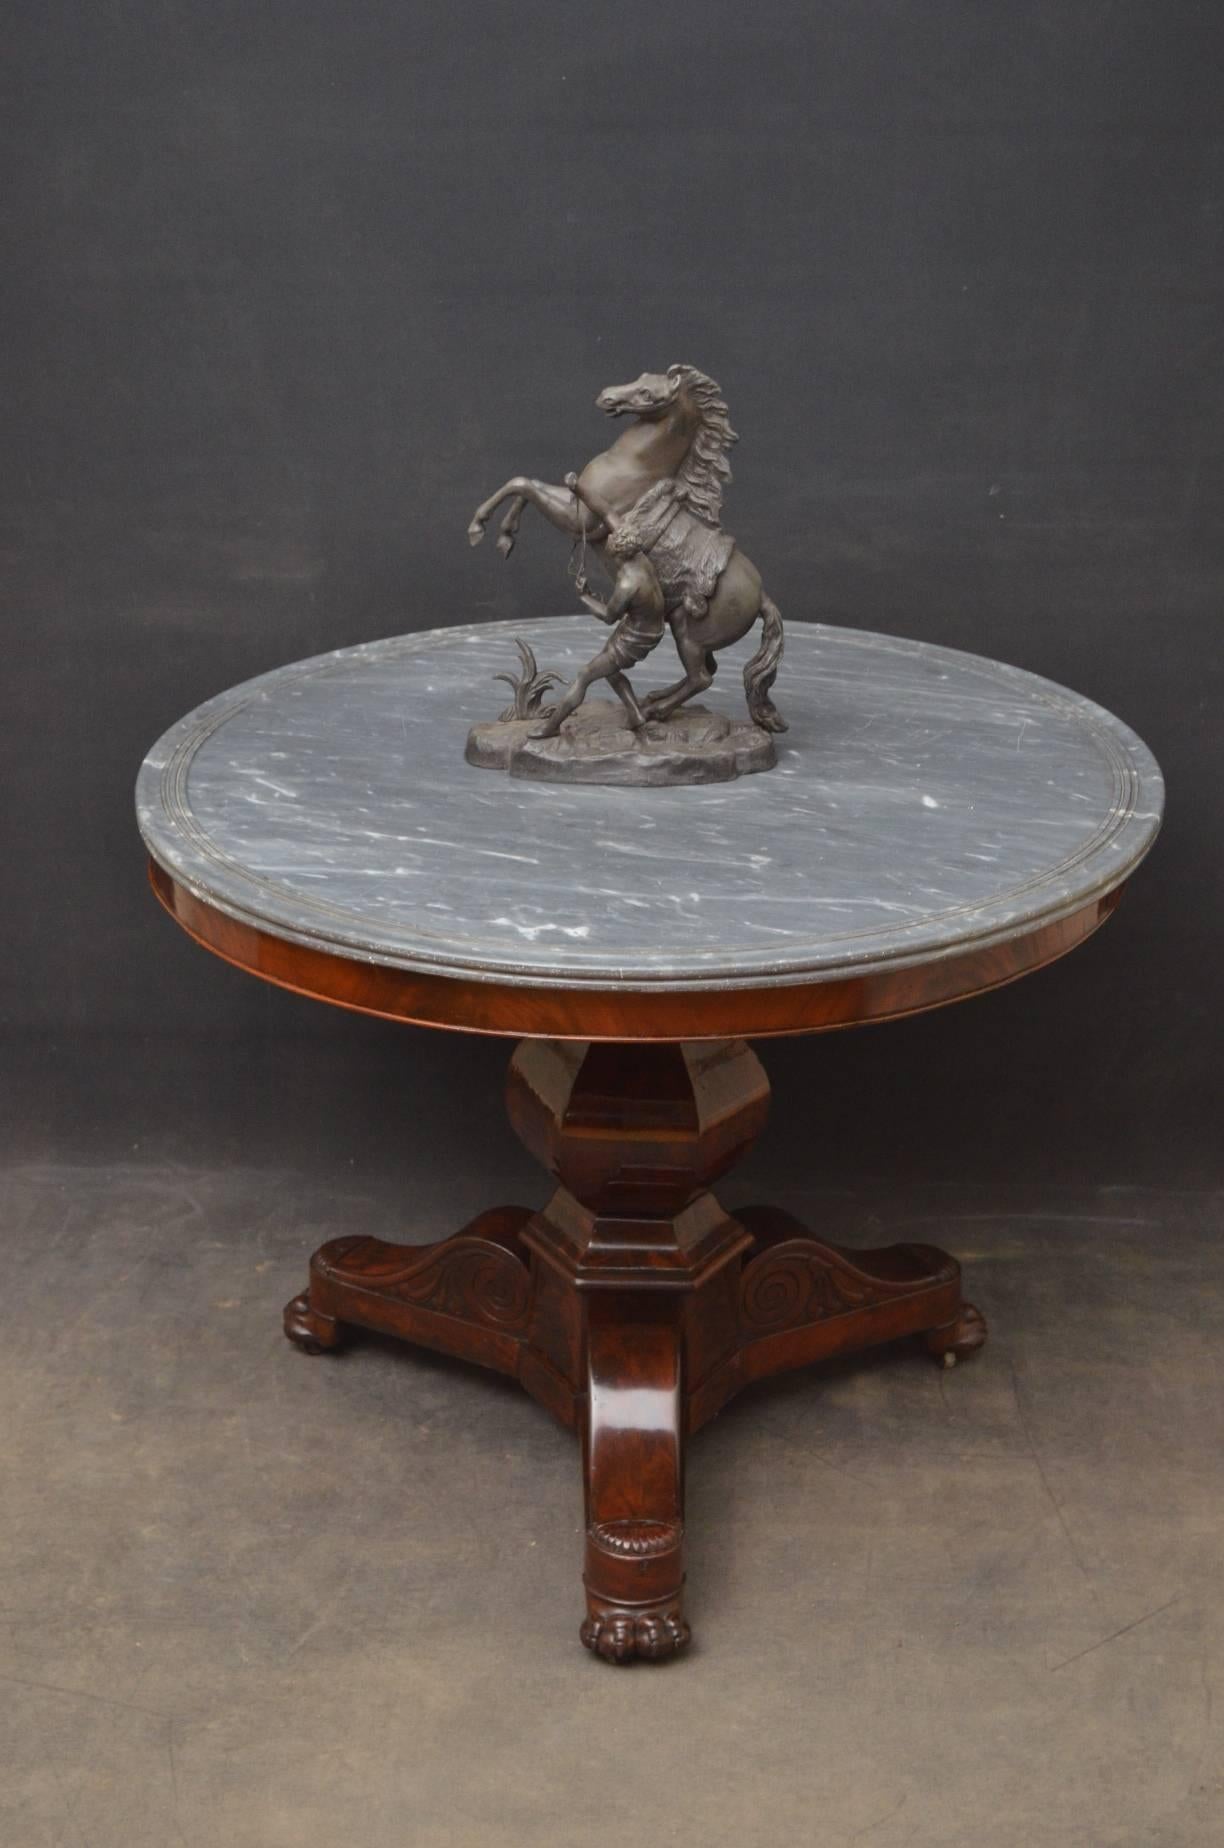 Sn4078 stunning, flamed mahogany William IV centre table / gueridon with excellent grey-white marble top and moulded frieze, standing on vase shaped, flamed mahogany column and curved flat facetted support with three outswept carved legs terminating